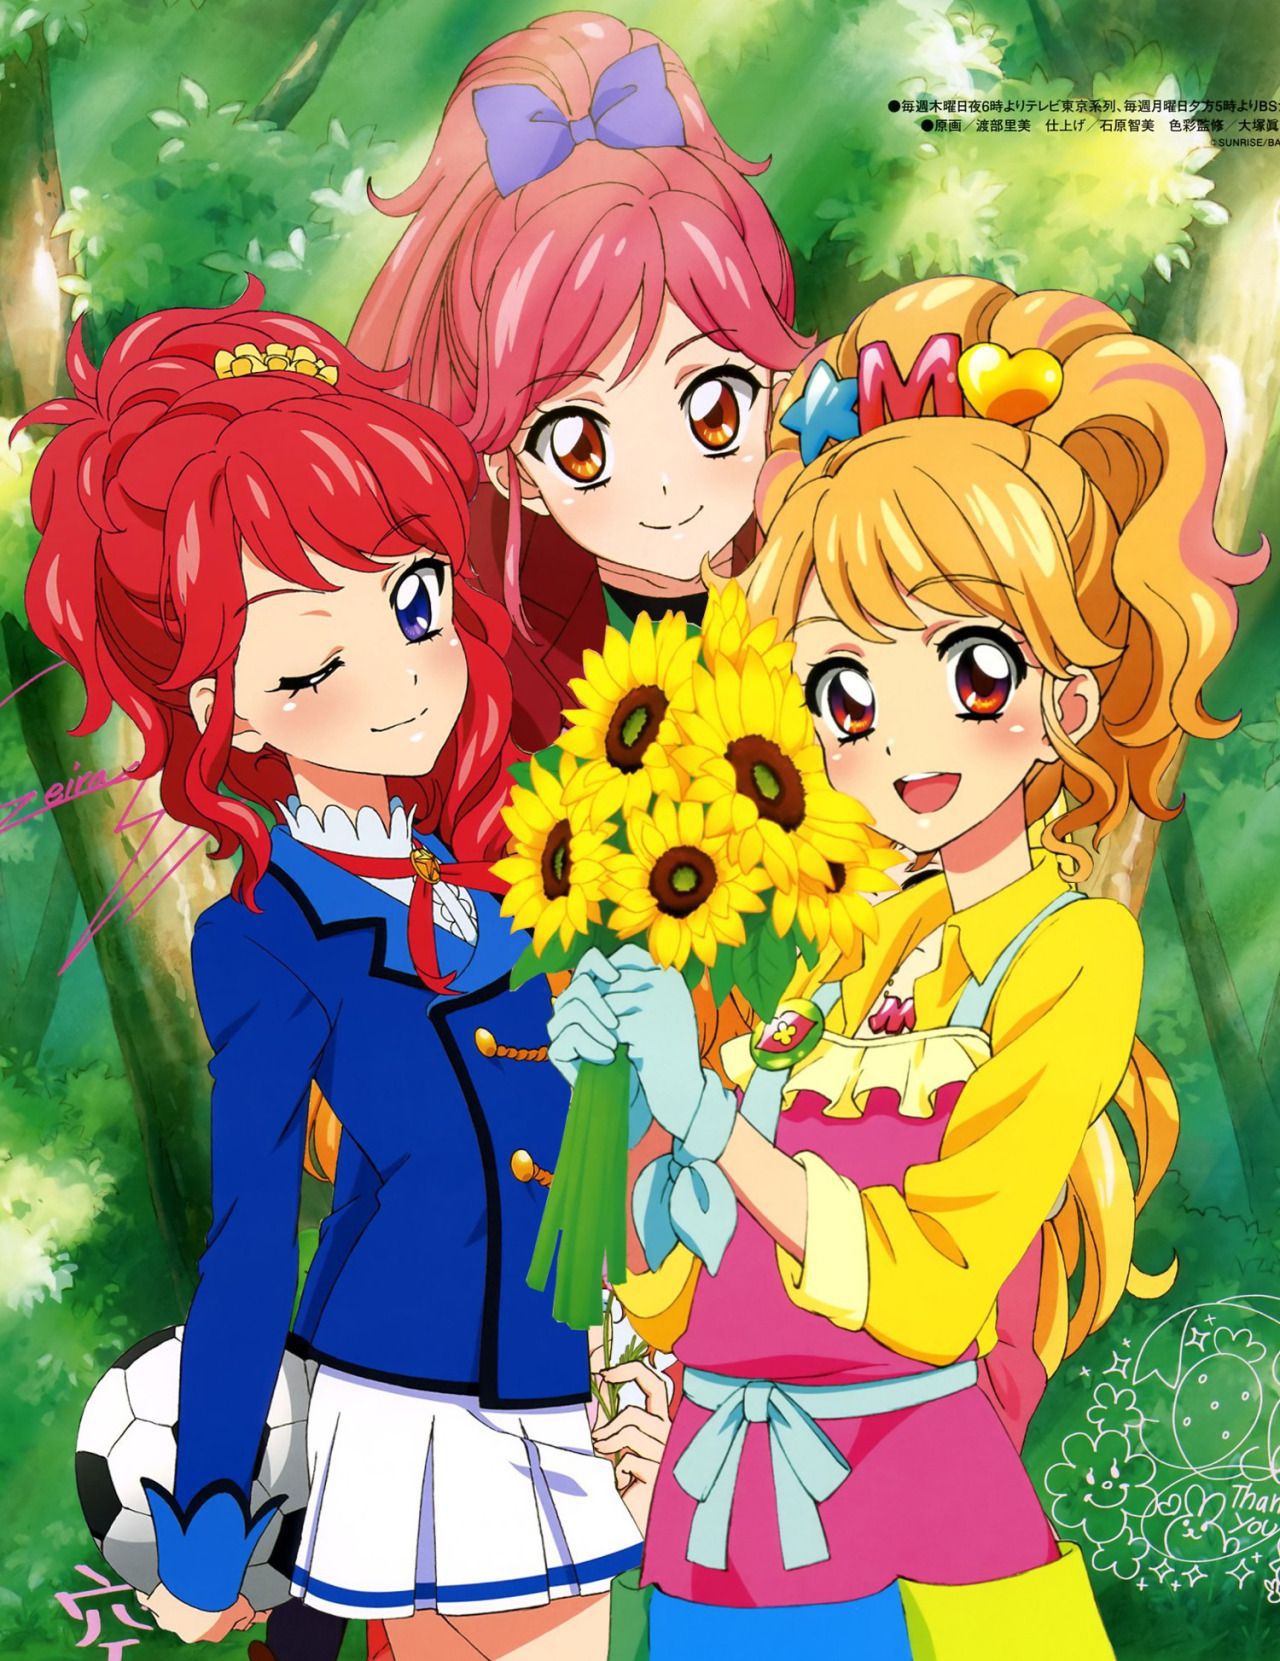 [Secondary, ZIP] summer 2: girl with a sunflower or image summary 30